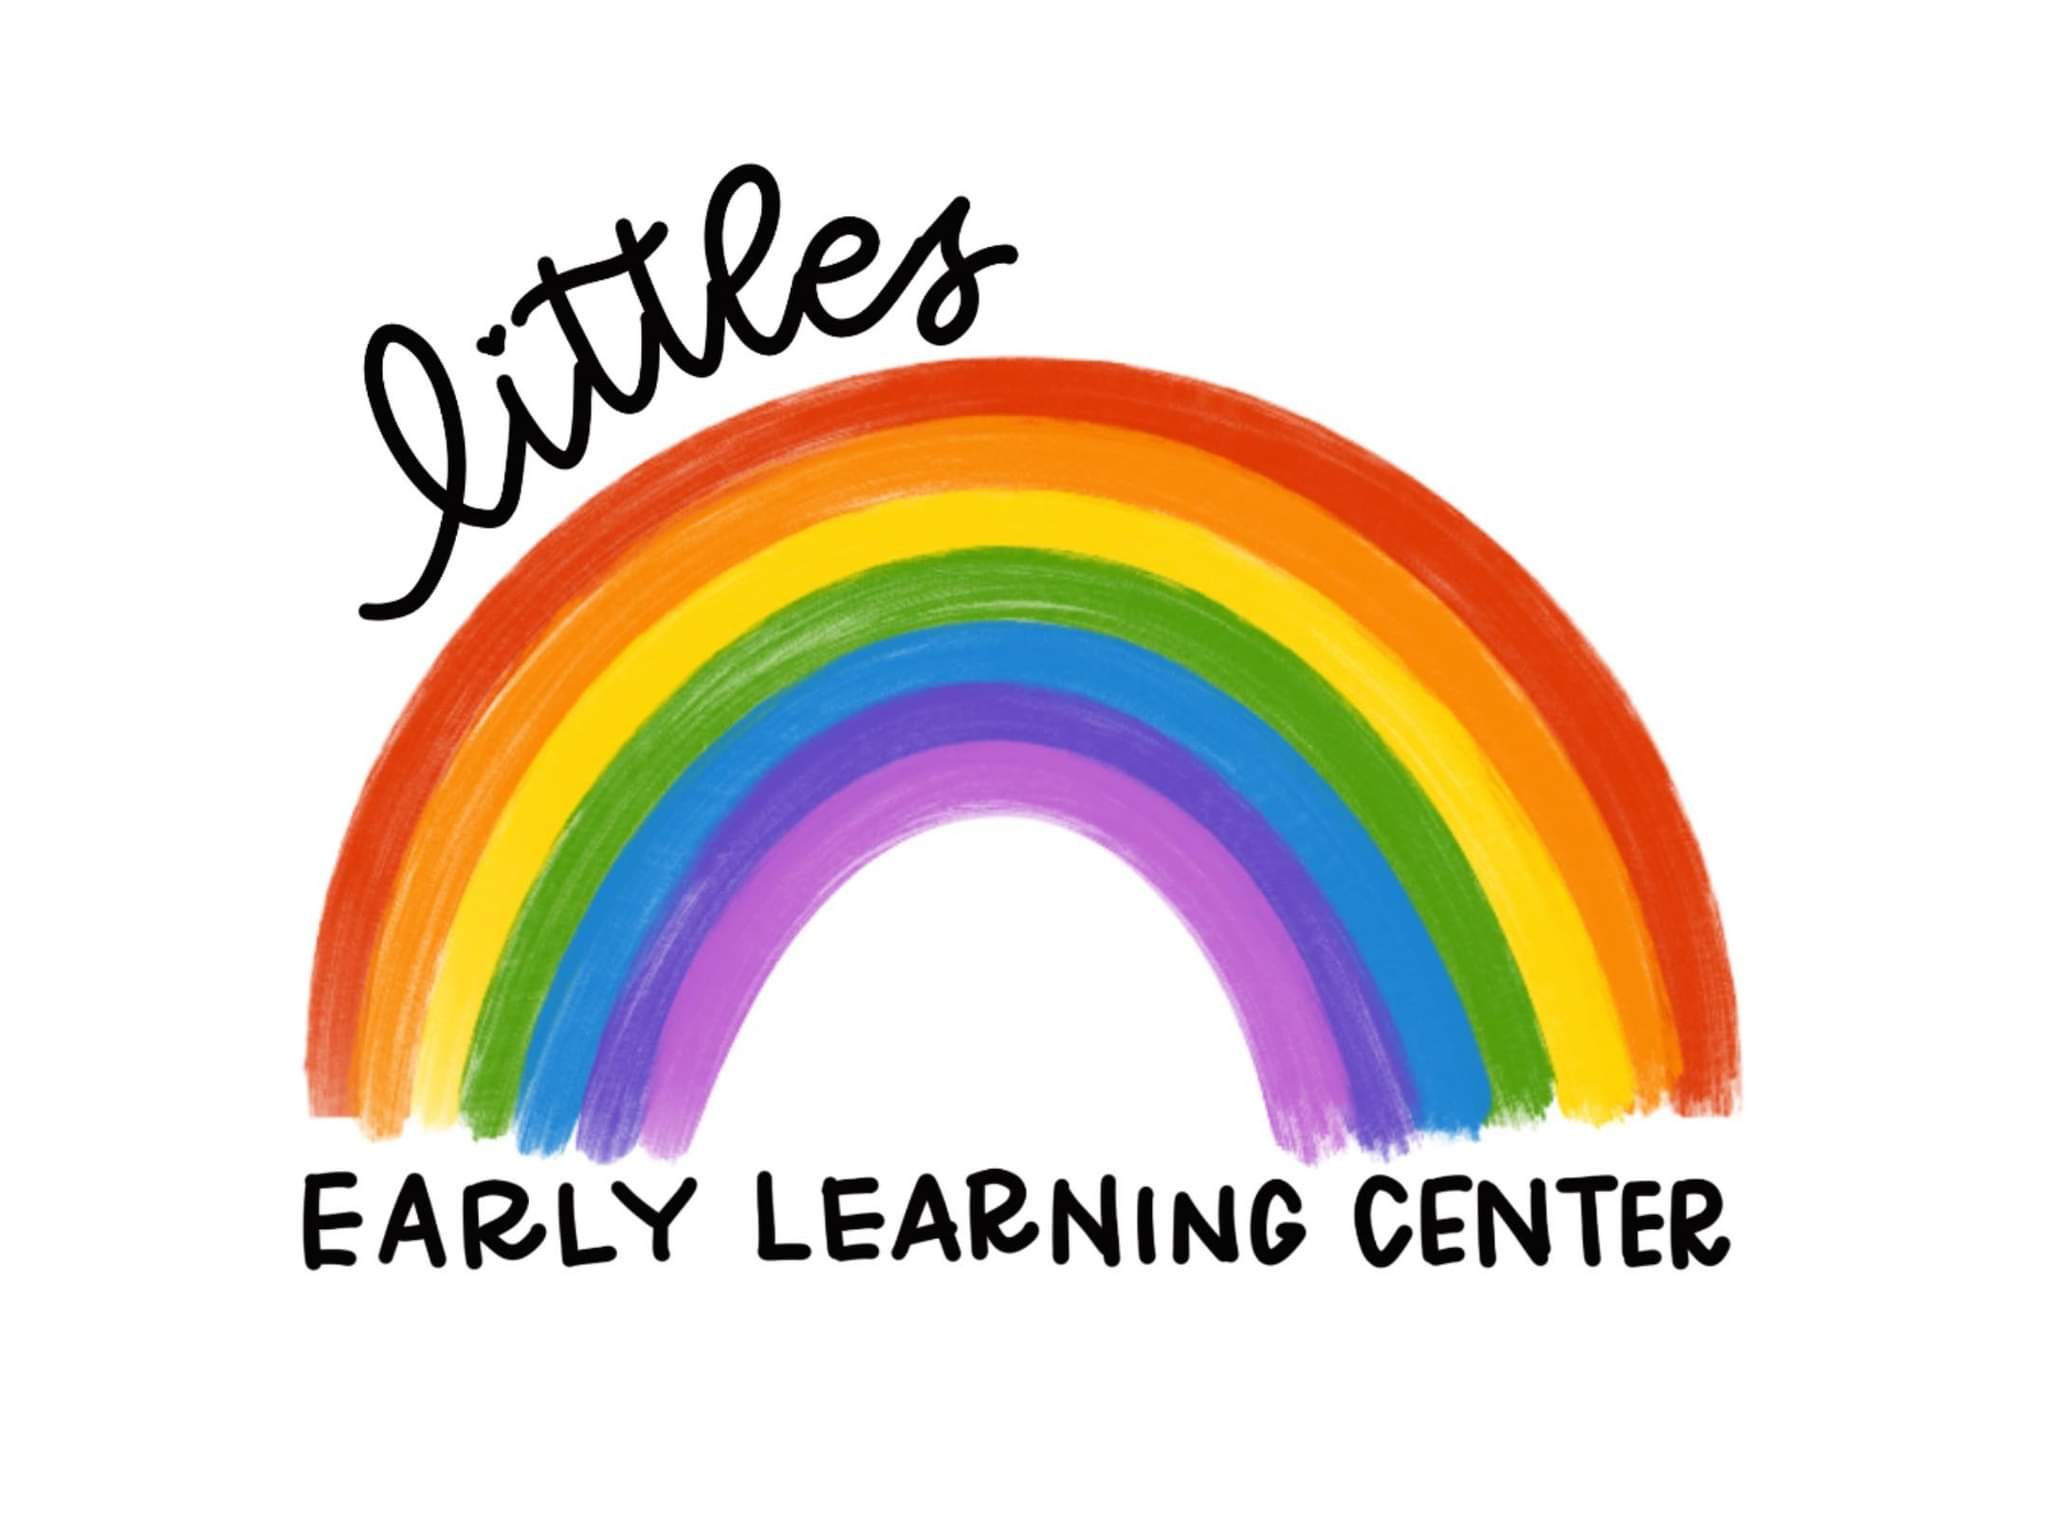 Littles Early Learning Center